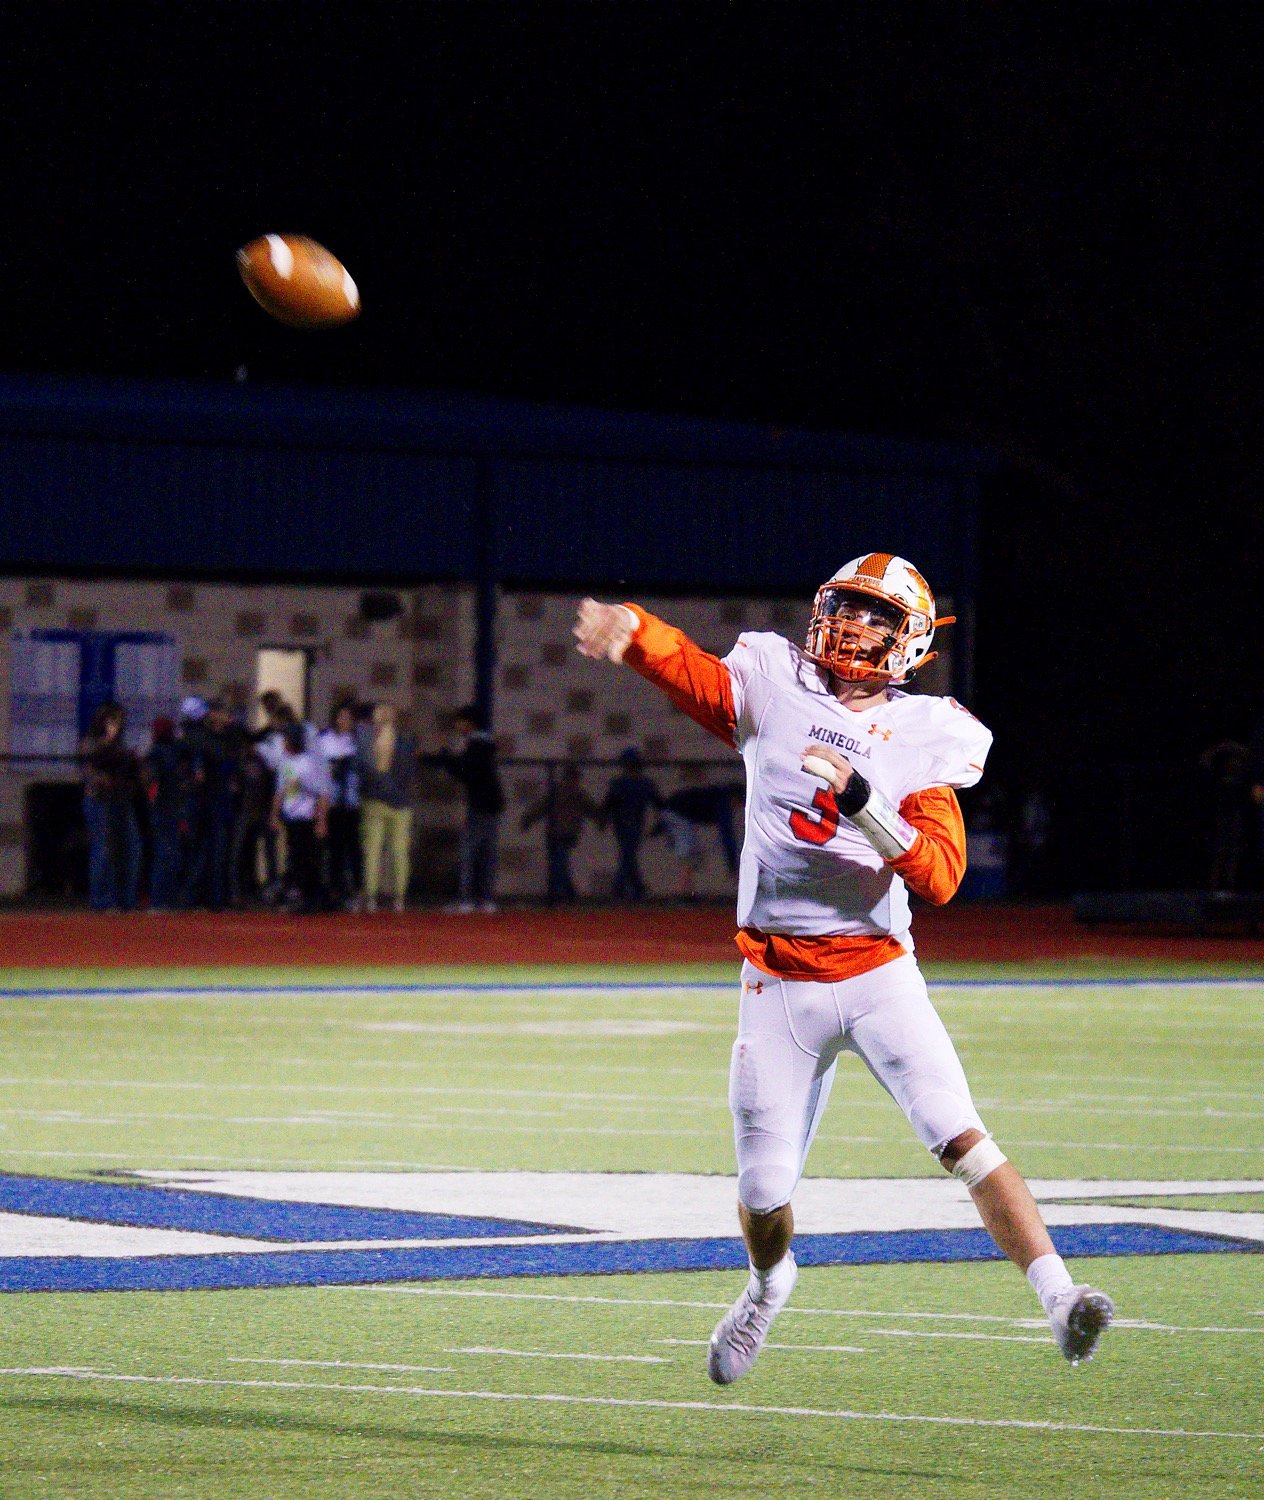 Mineola quarterback T.J. Moreland fires away on one of his 18 pass attempts on the night, 12 of which found Yellowjacket receivers for 154 passing yards. [See more of how Mineola reigned supreme.]